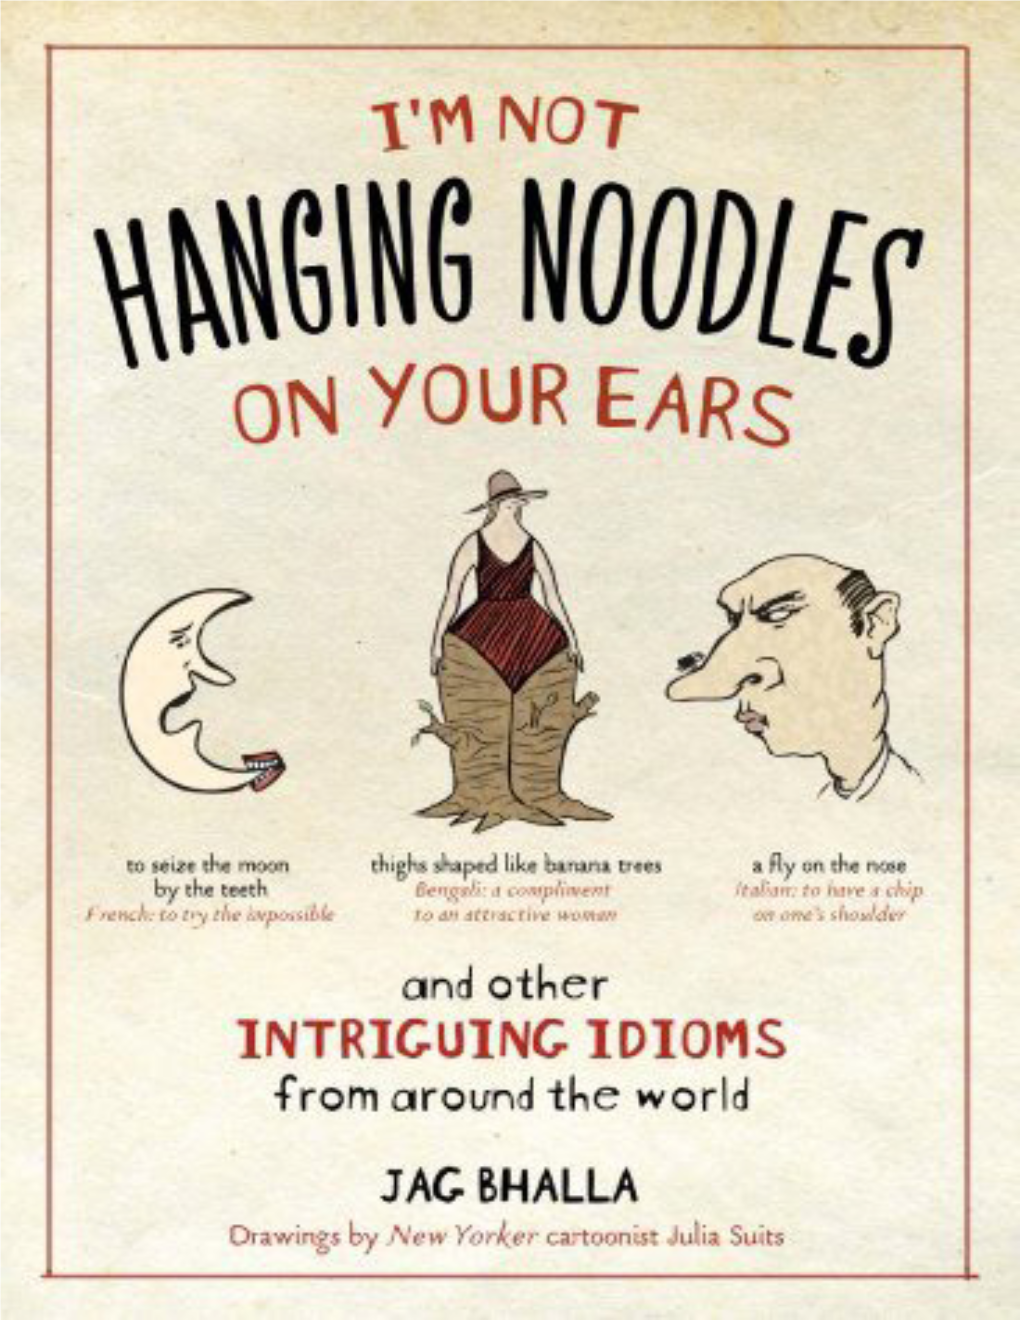 I'm Not Hanging Noodles on Your Ears and Other Intriguing Idioms